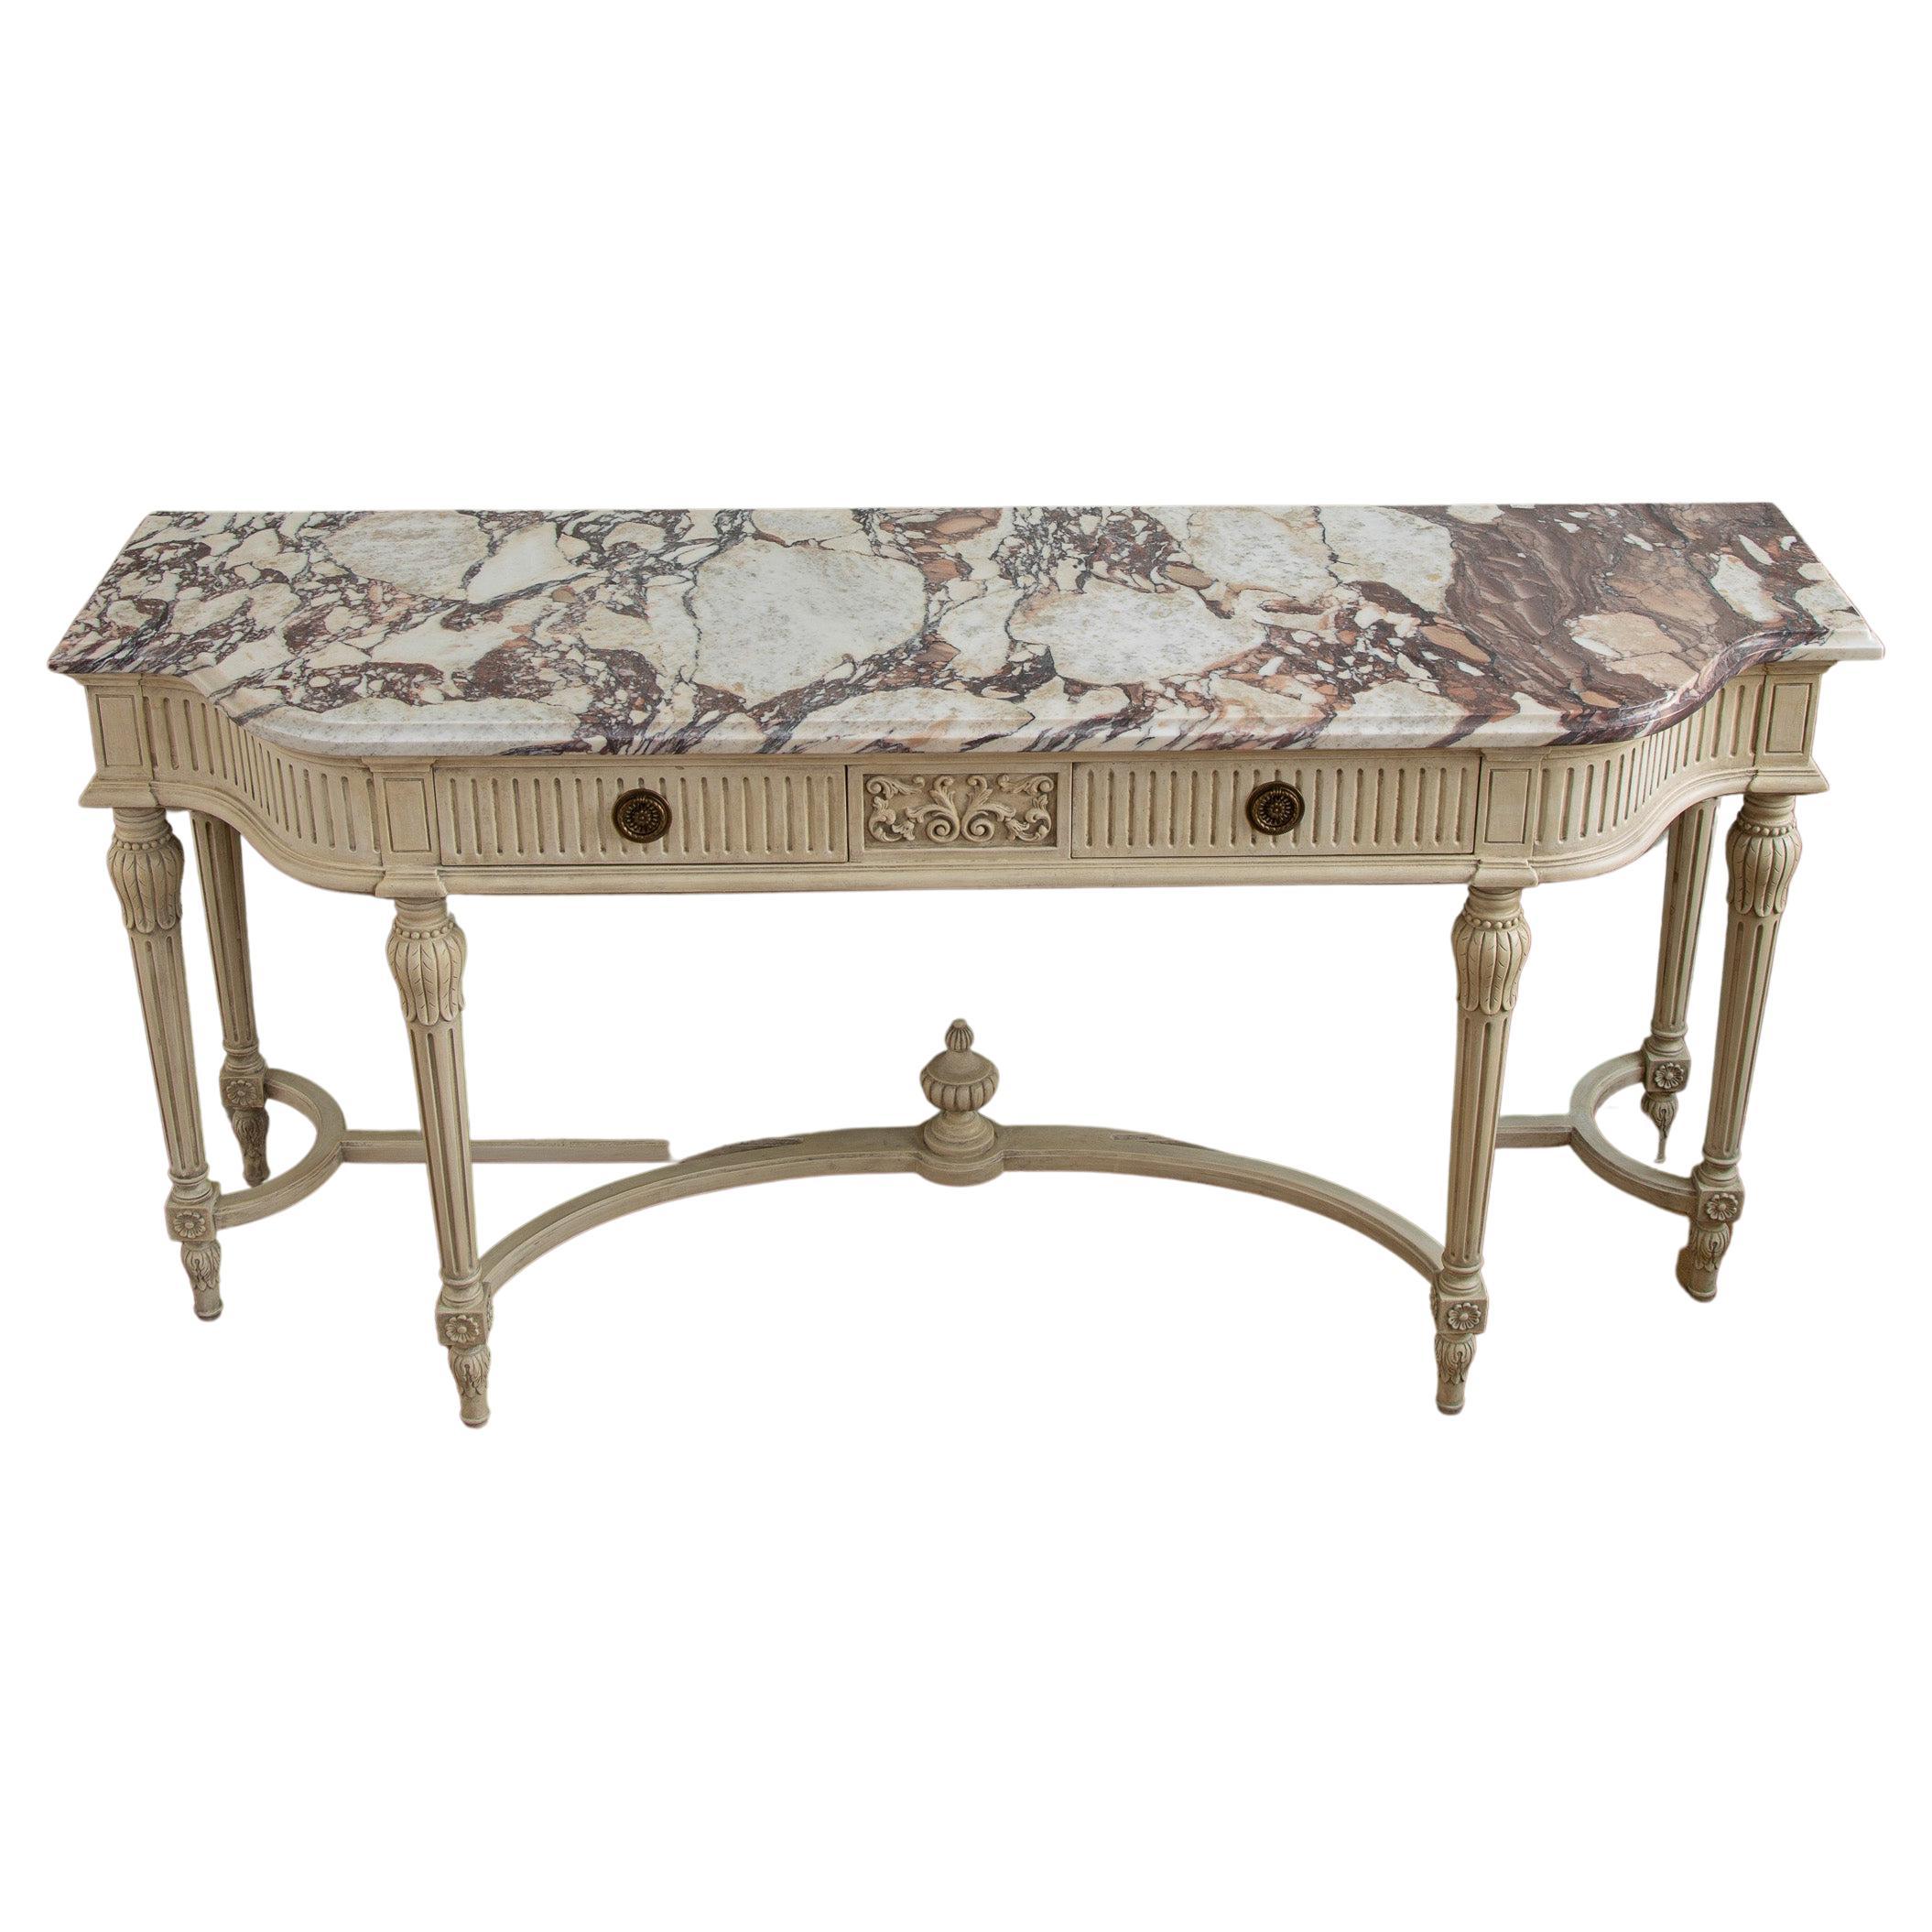 A hand carved/hand finished console in the Gustavian Style featuring Louis XVI detailing with two drawers in a lightly aged, antique white, patina. A further striking feature of this piece is the French Breche Violette marble top, beveled to shape.